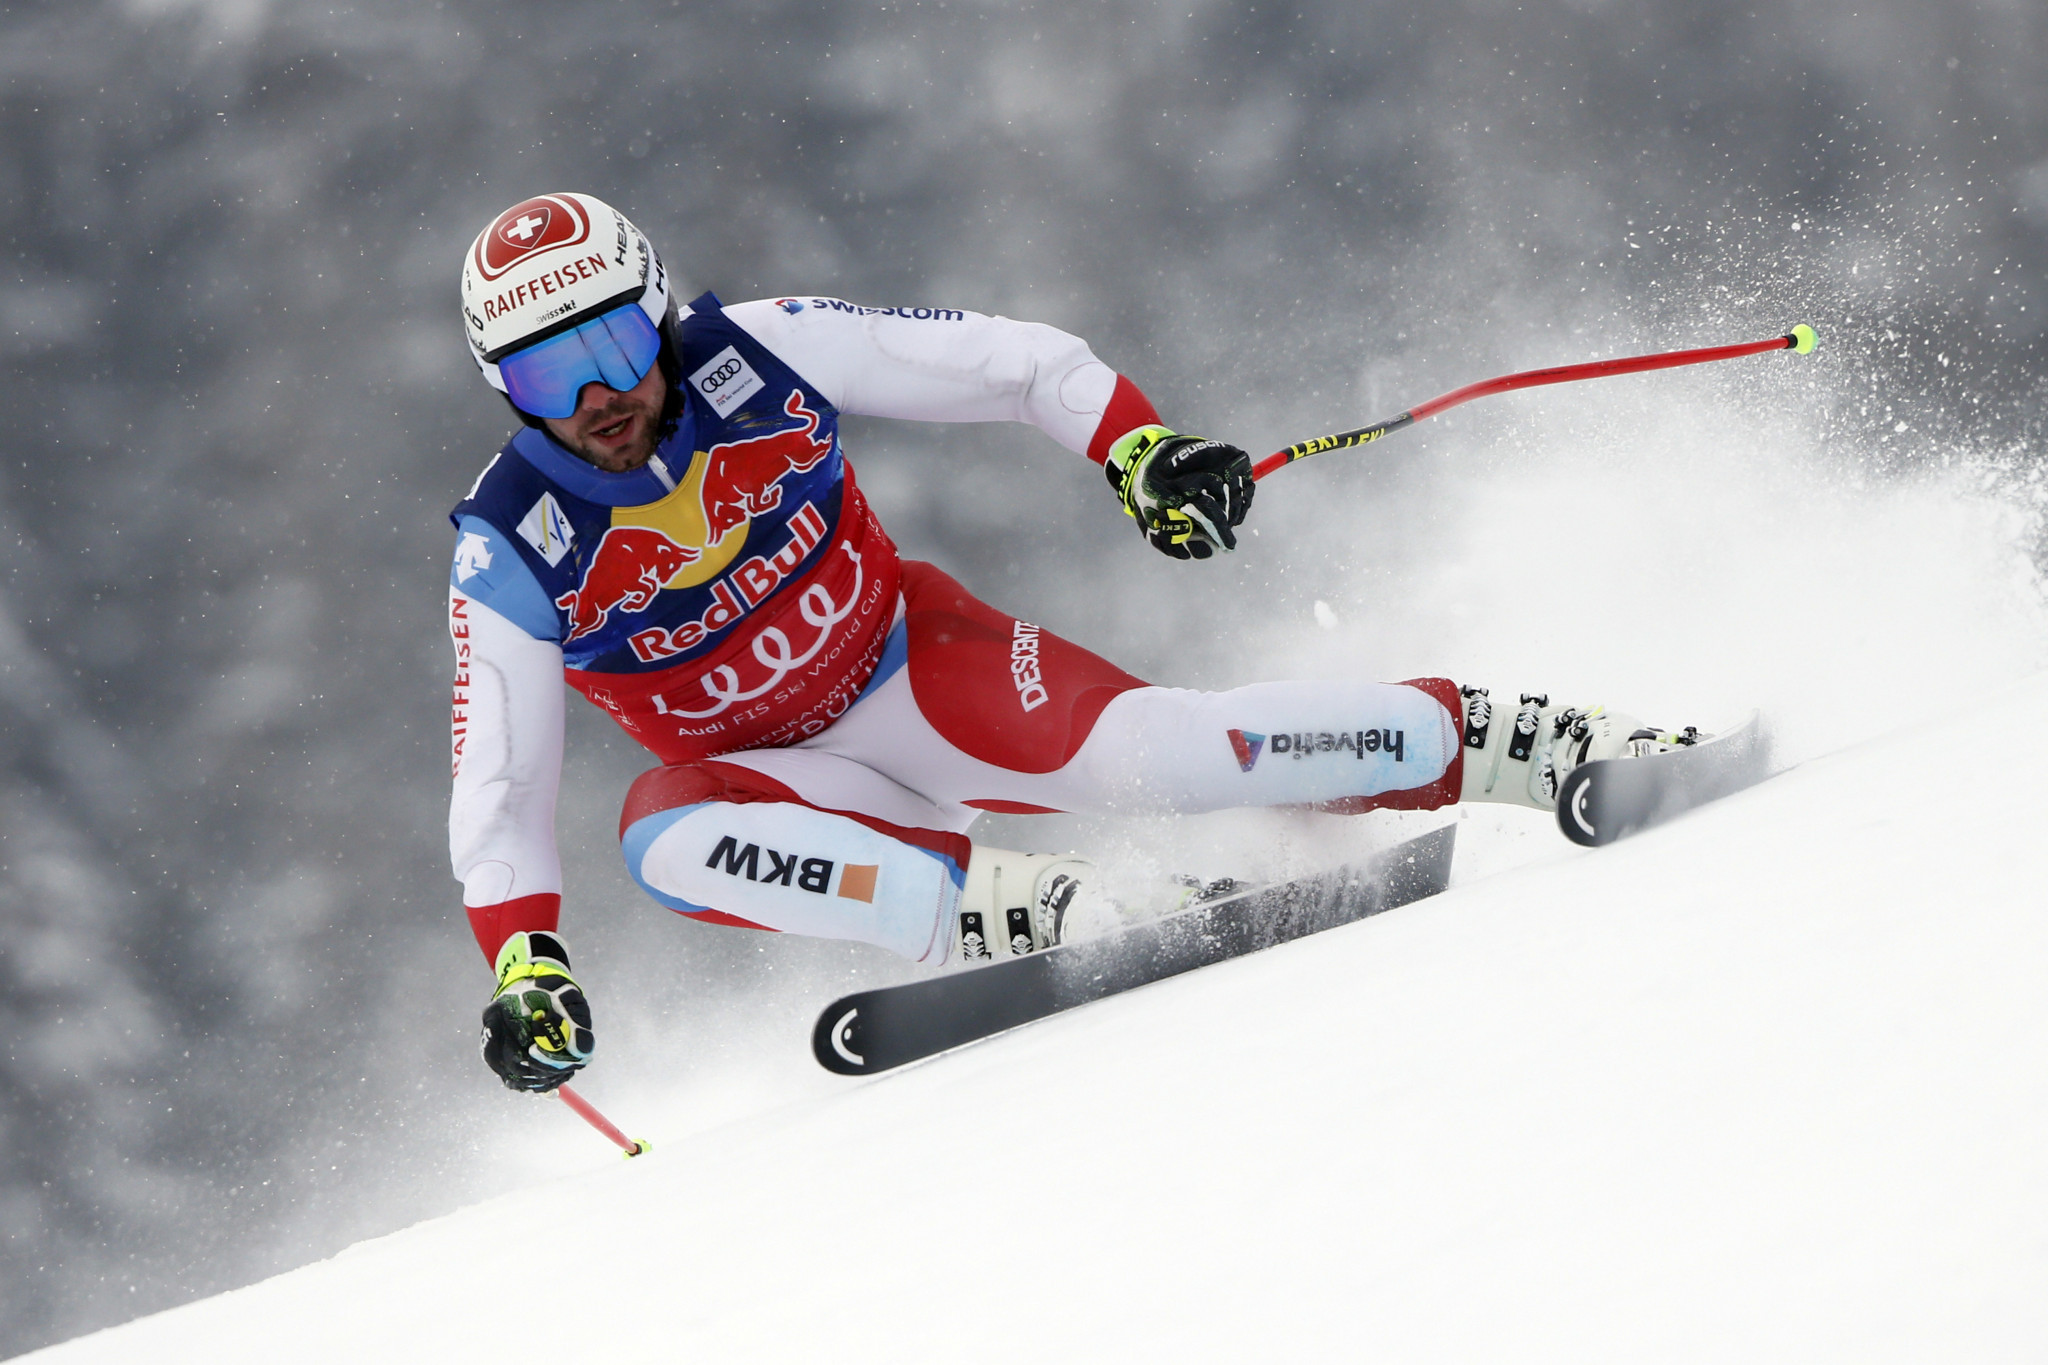 Switzerland's Beat Feuz, who leads the World Cup standings in downhill, finished exactly three seconds behind in 32nd place ©Getty Images